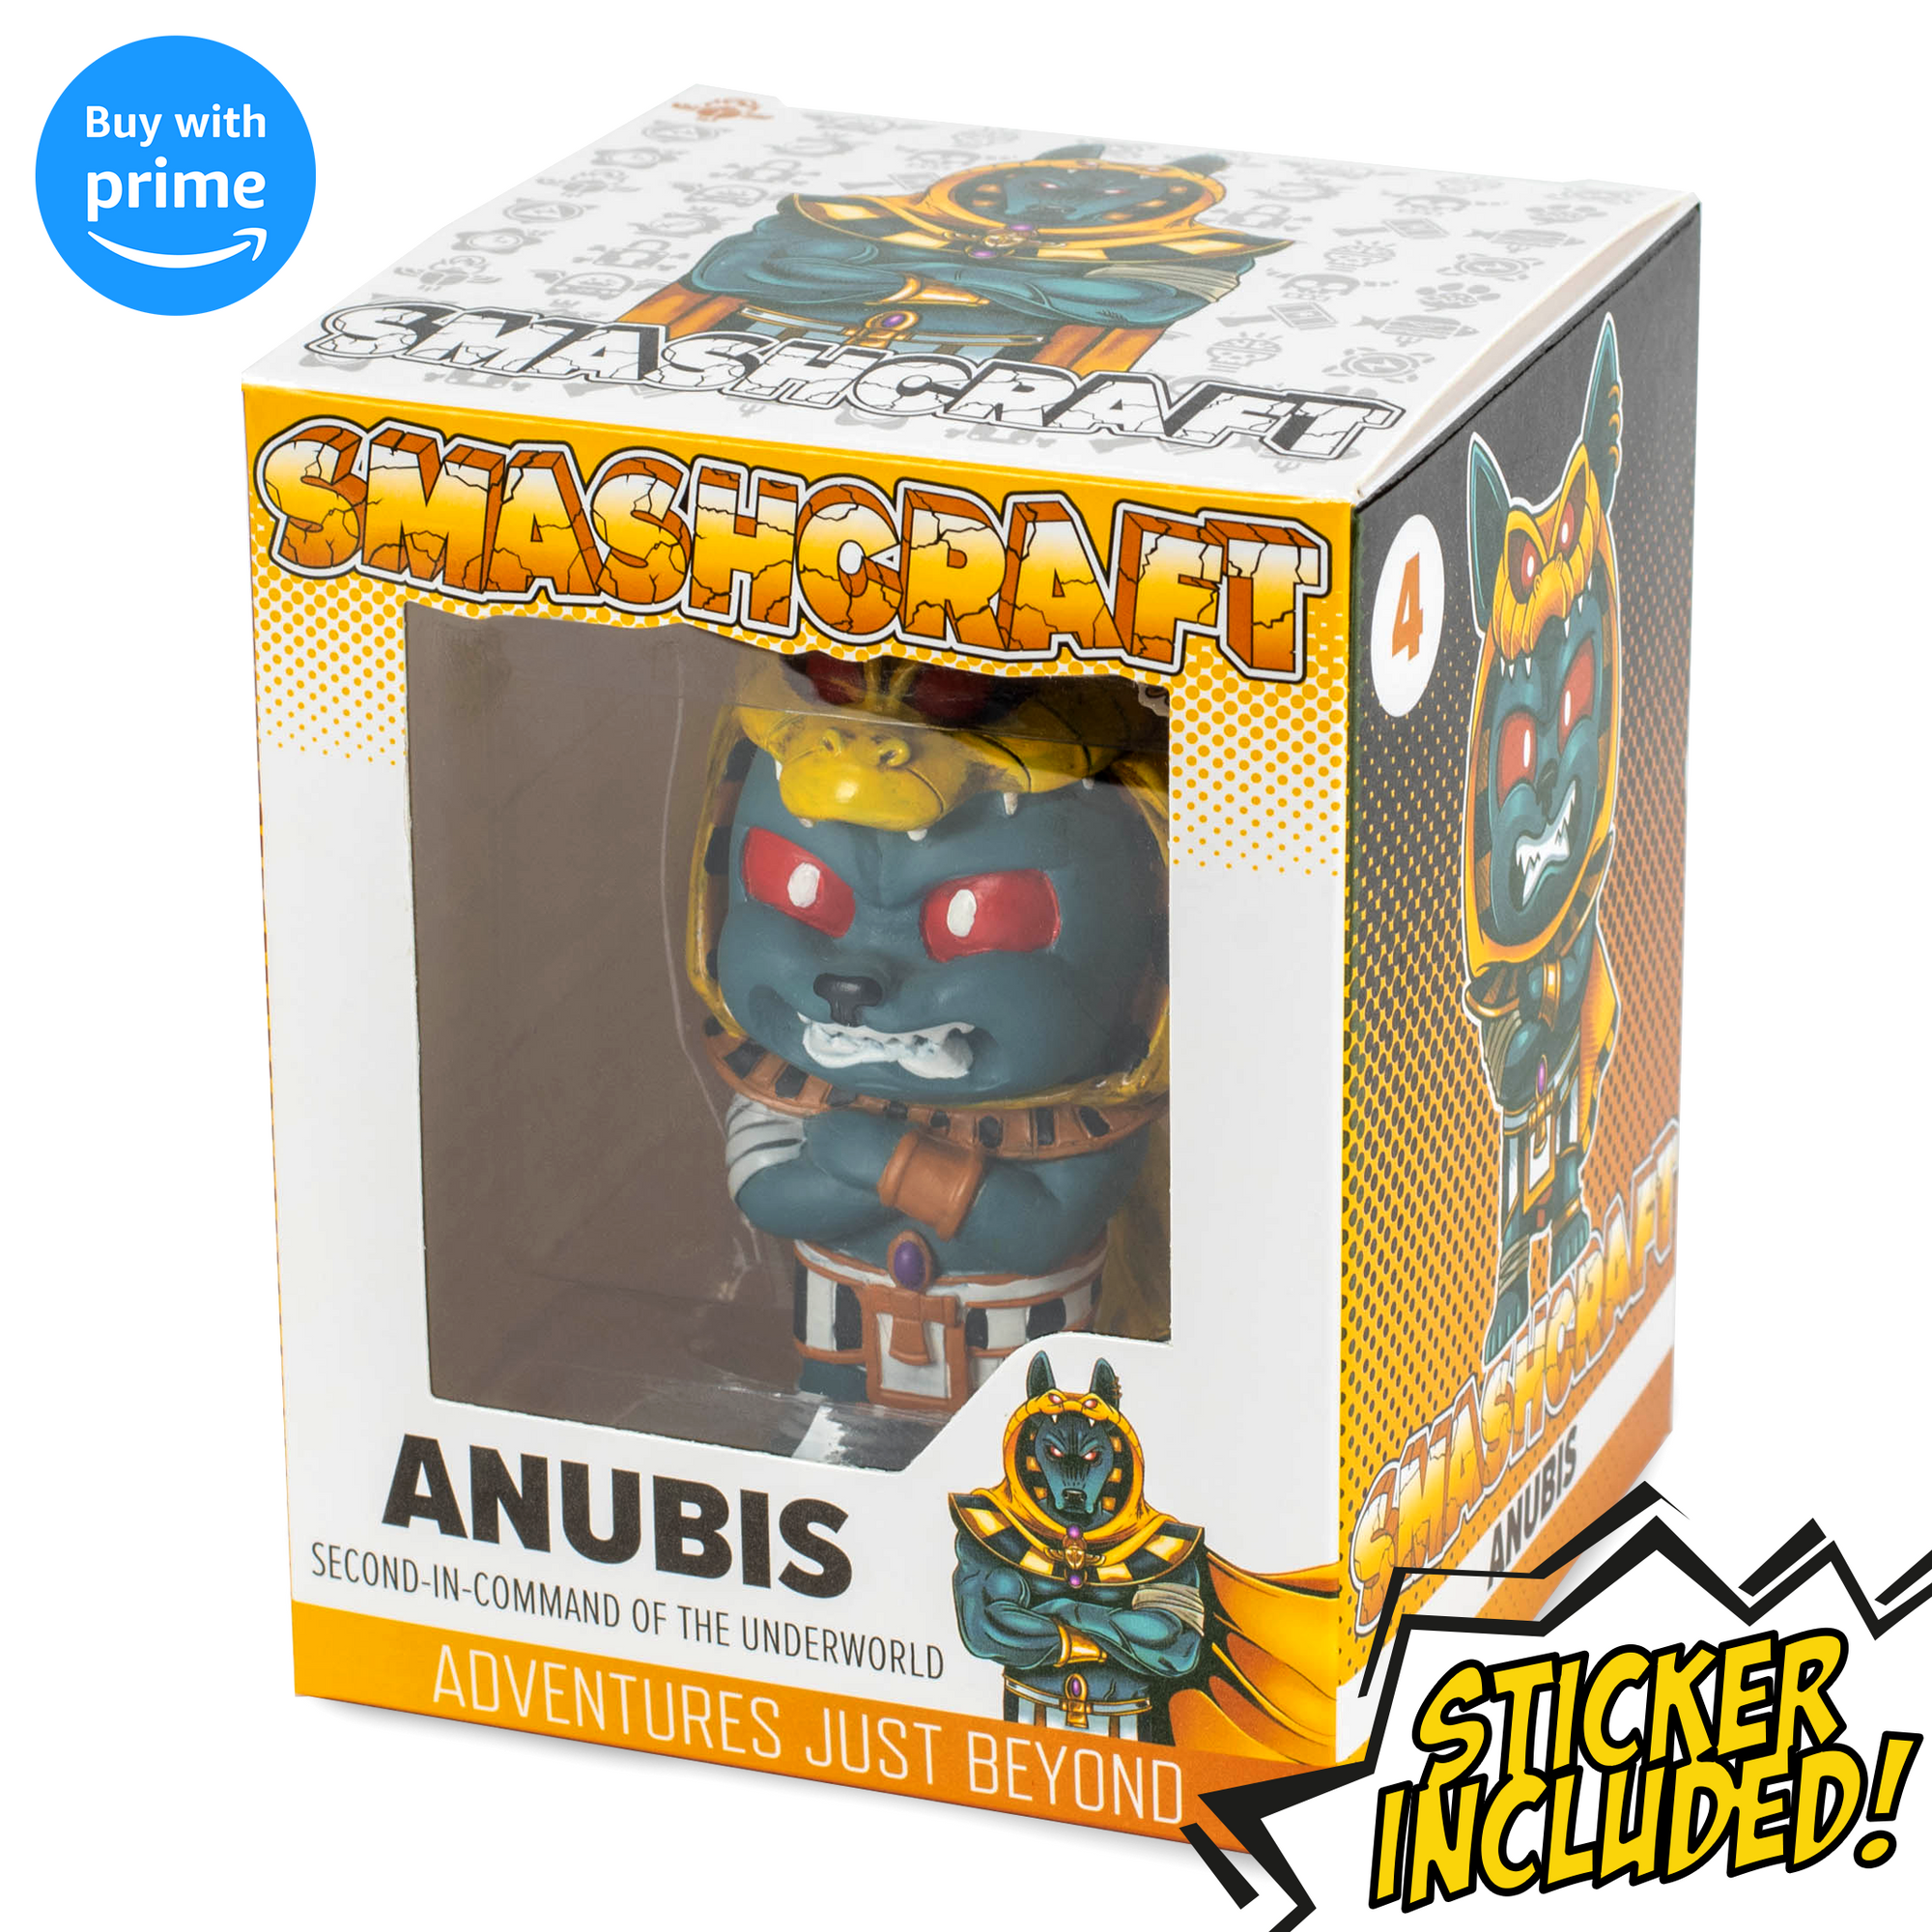 Smashcraft Anubis collectors box, with back story and memorabilia mythological character sticker